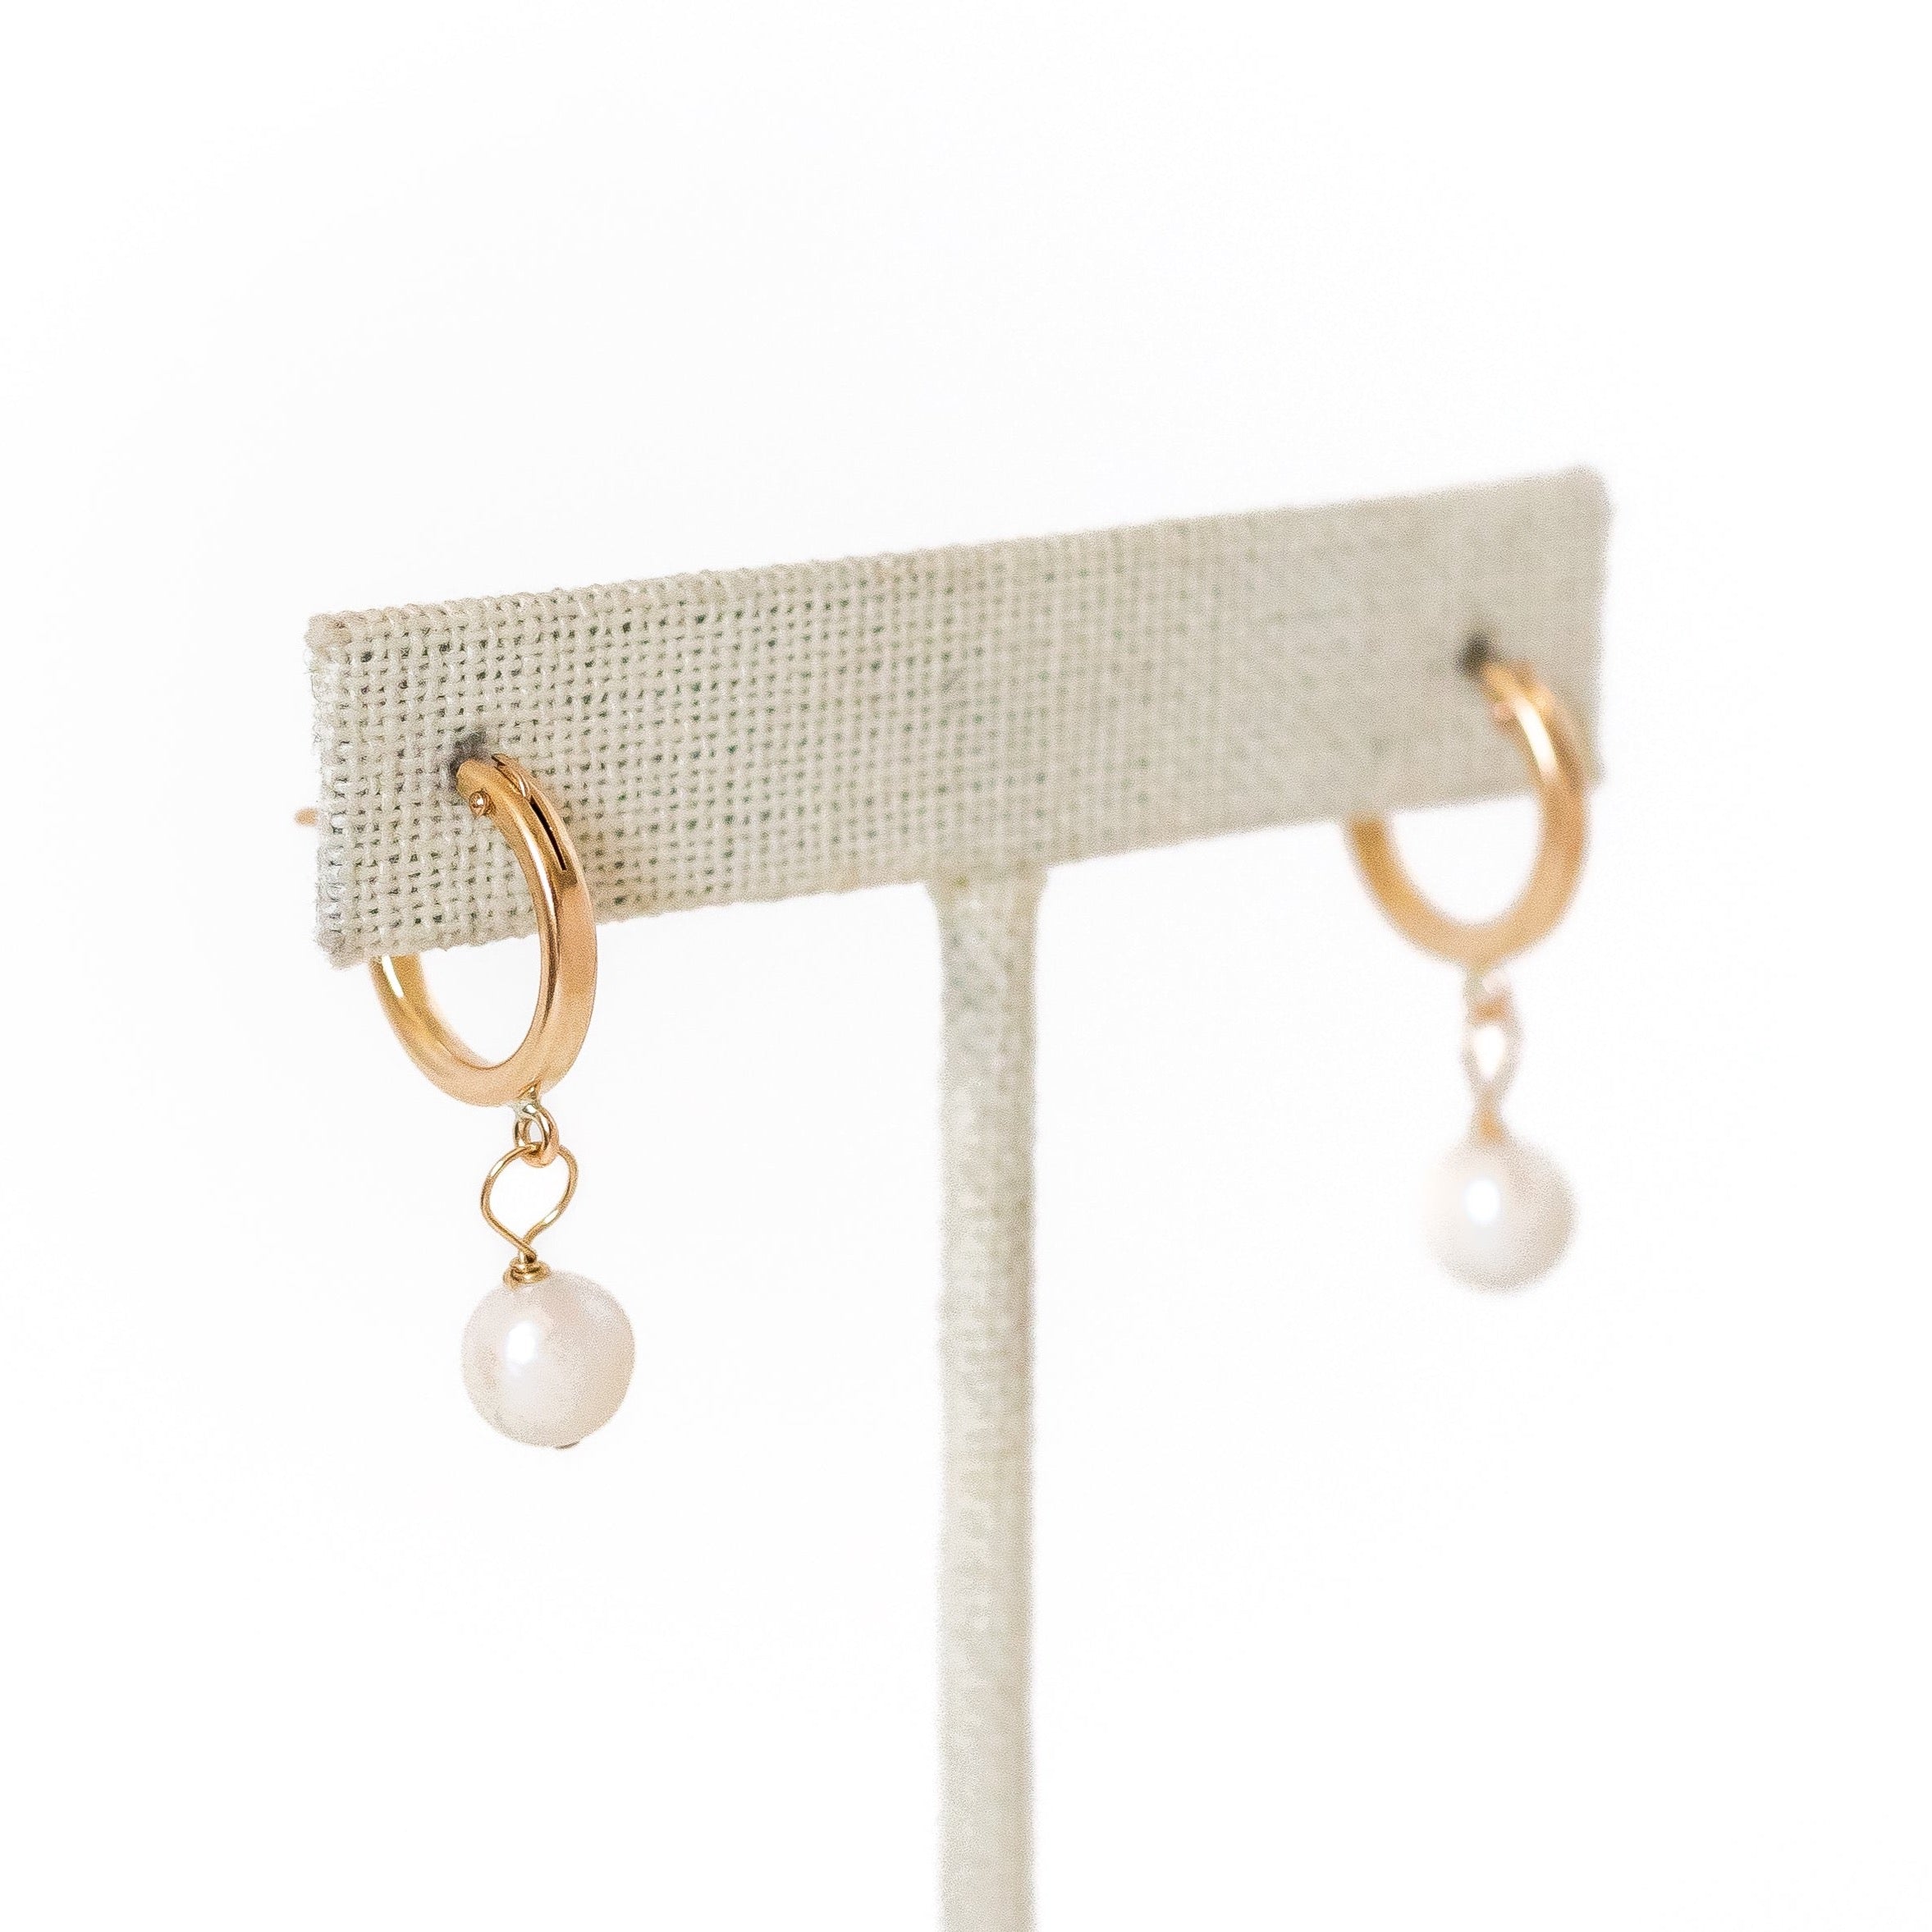 18 millimeter gold filled hoops with a tiny pearl wire wrapped to hang from the bottom. 